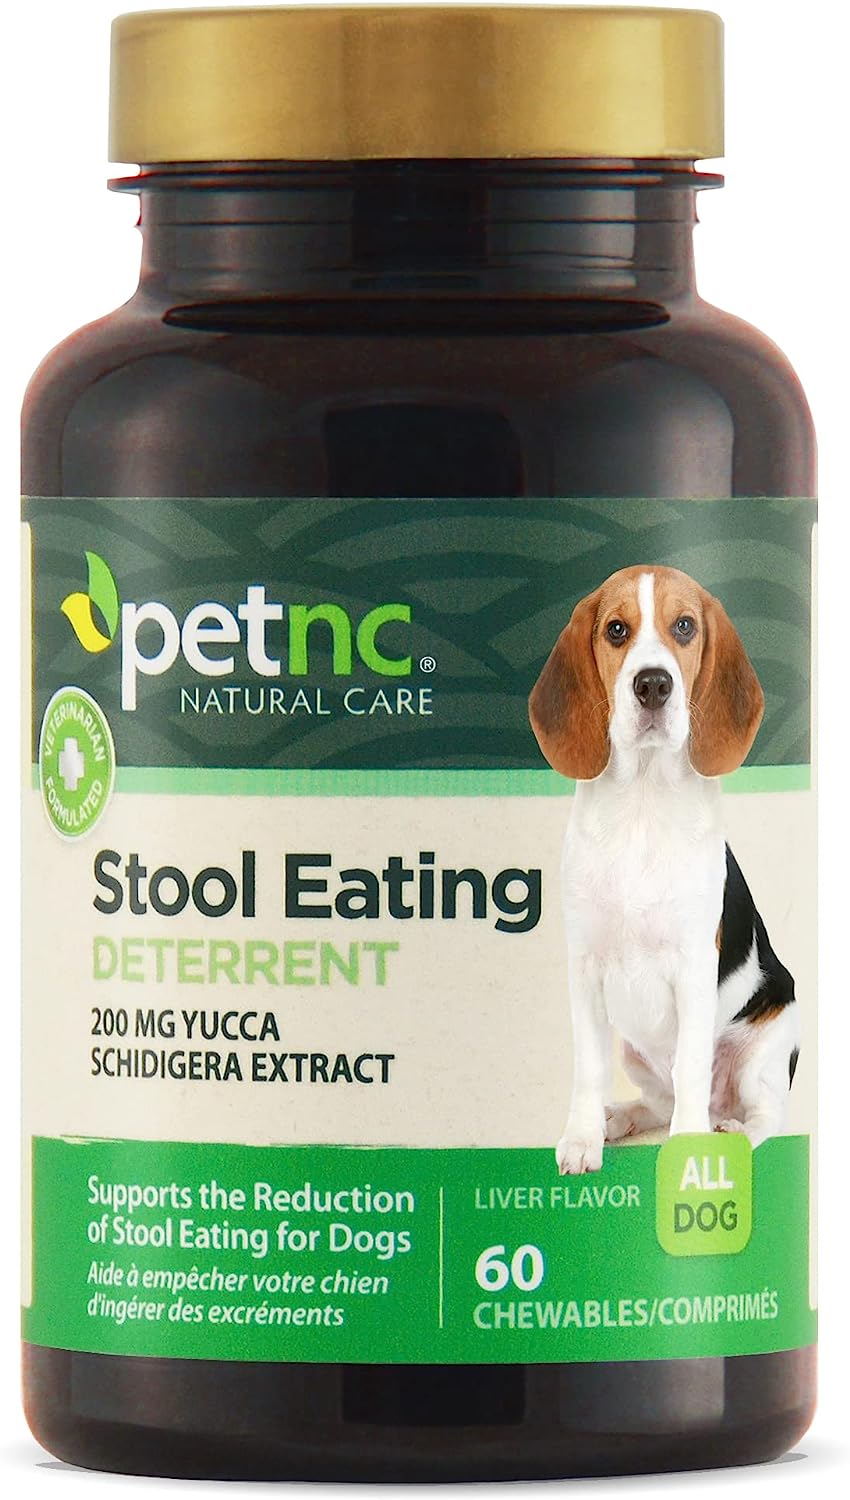 PetNC Natural Care Stool Eating Deterrent Chewables for Dogs - Best supplements for dogs